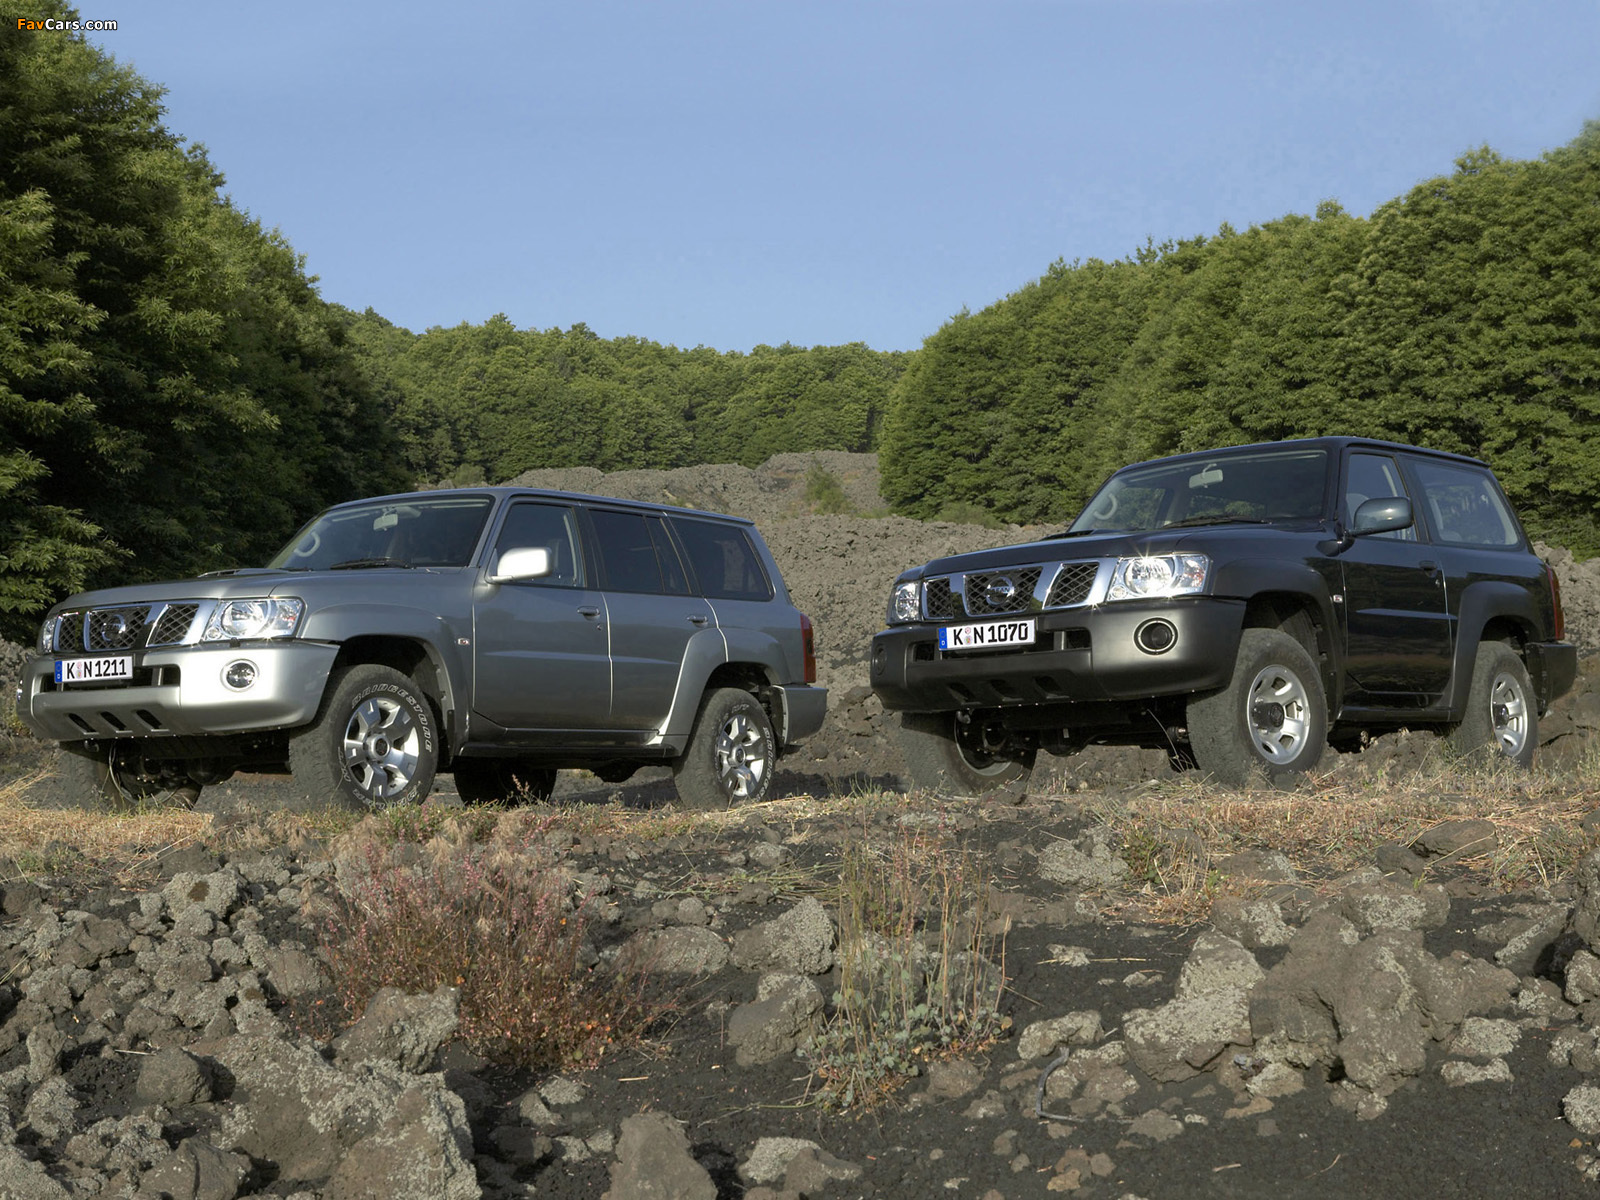 Images of Nissan Patrol (1600 x 1200)